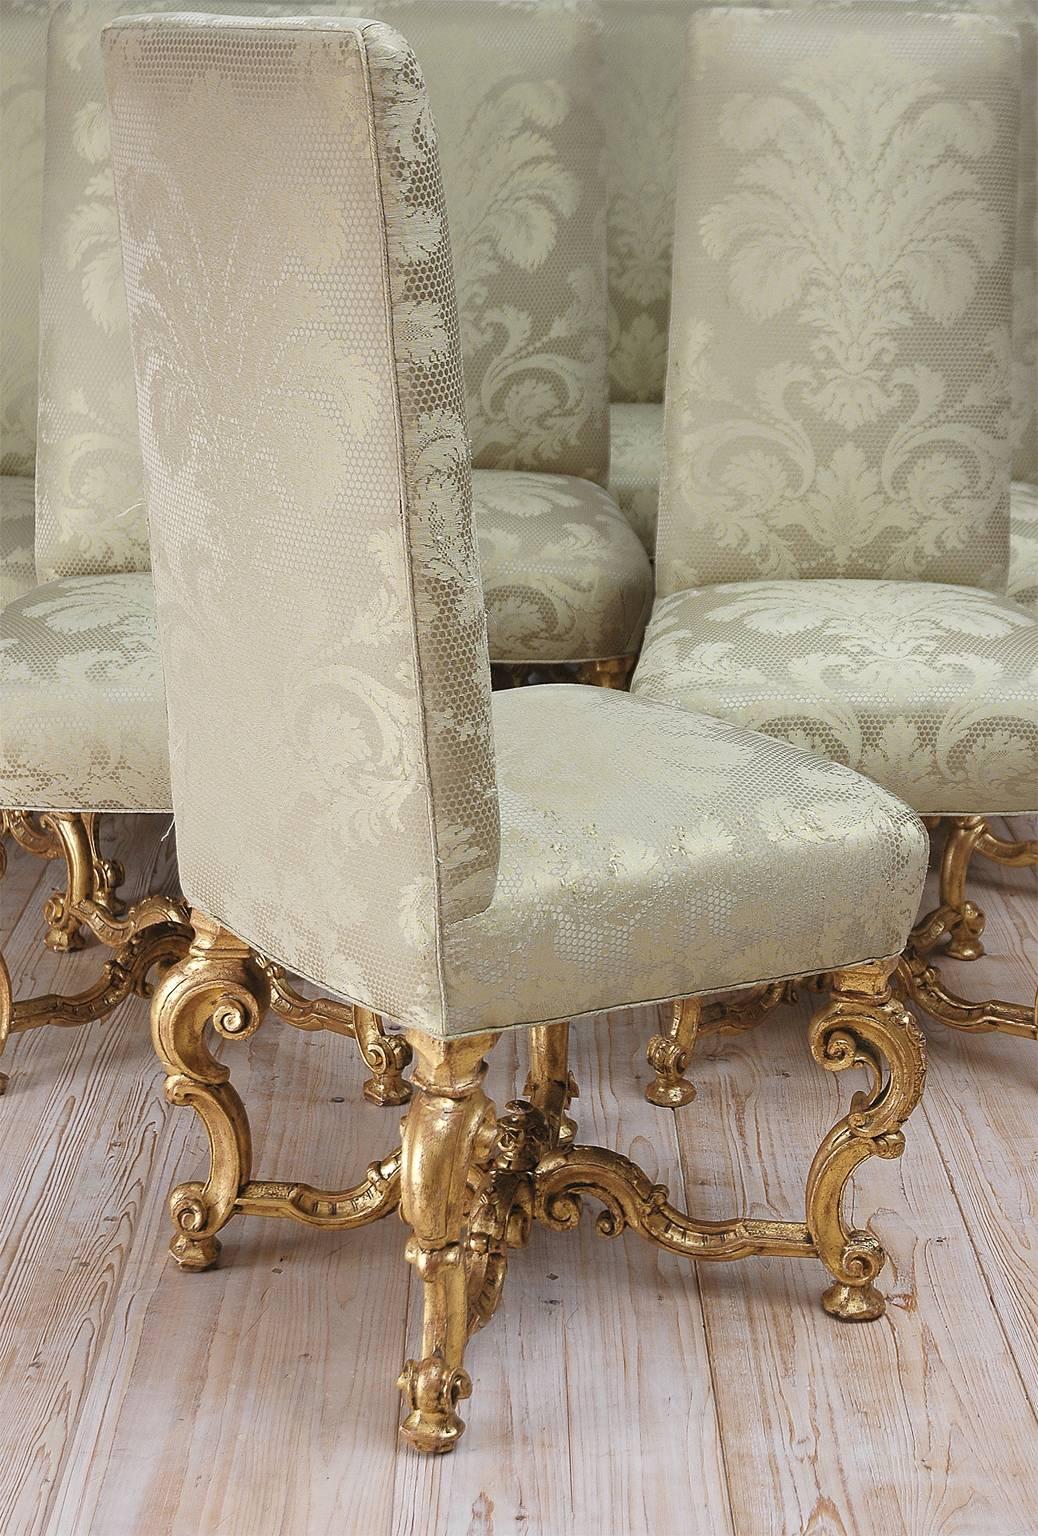 20th Century Set of Ten (10) Venetian Dining Chairs in Carved and Gilded Wood with Upholstery